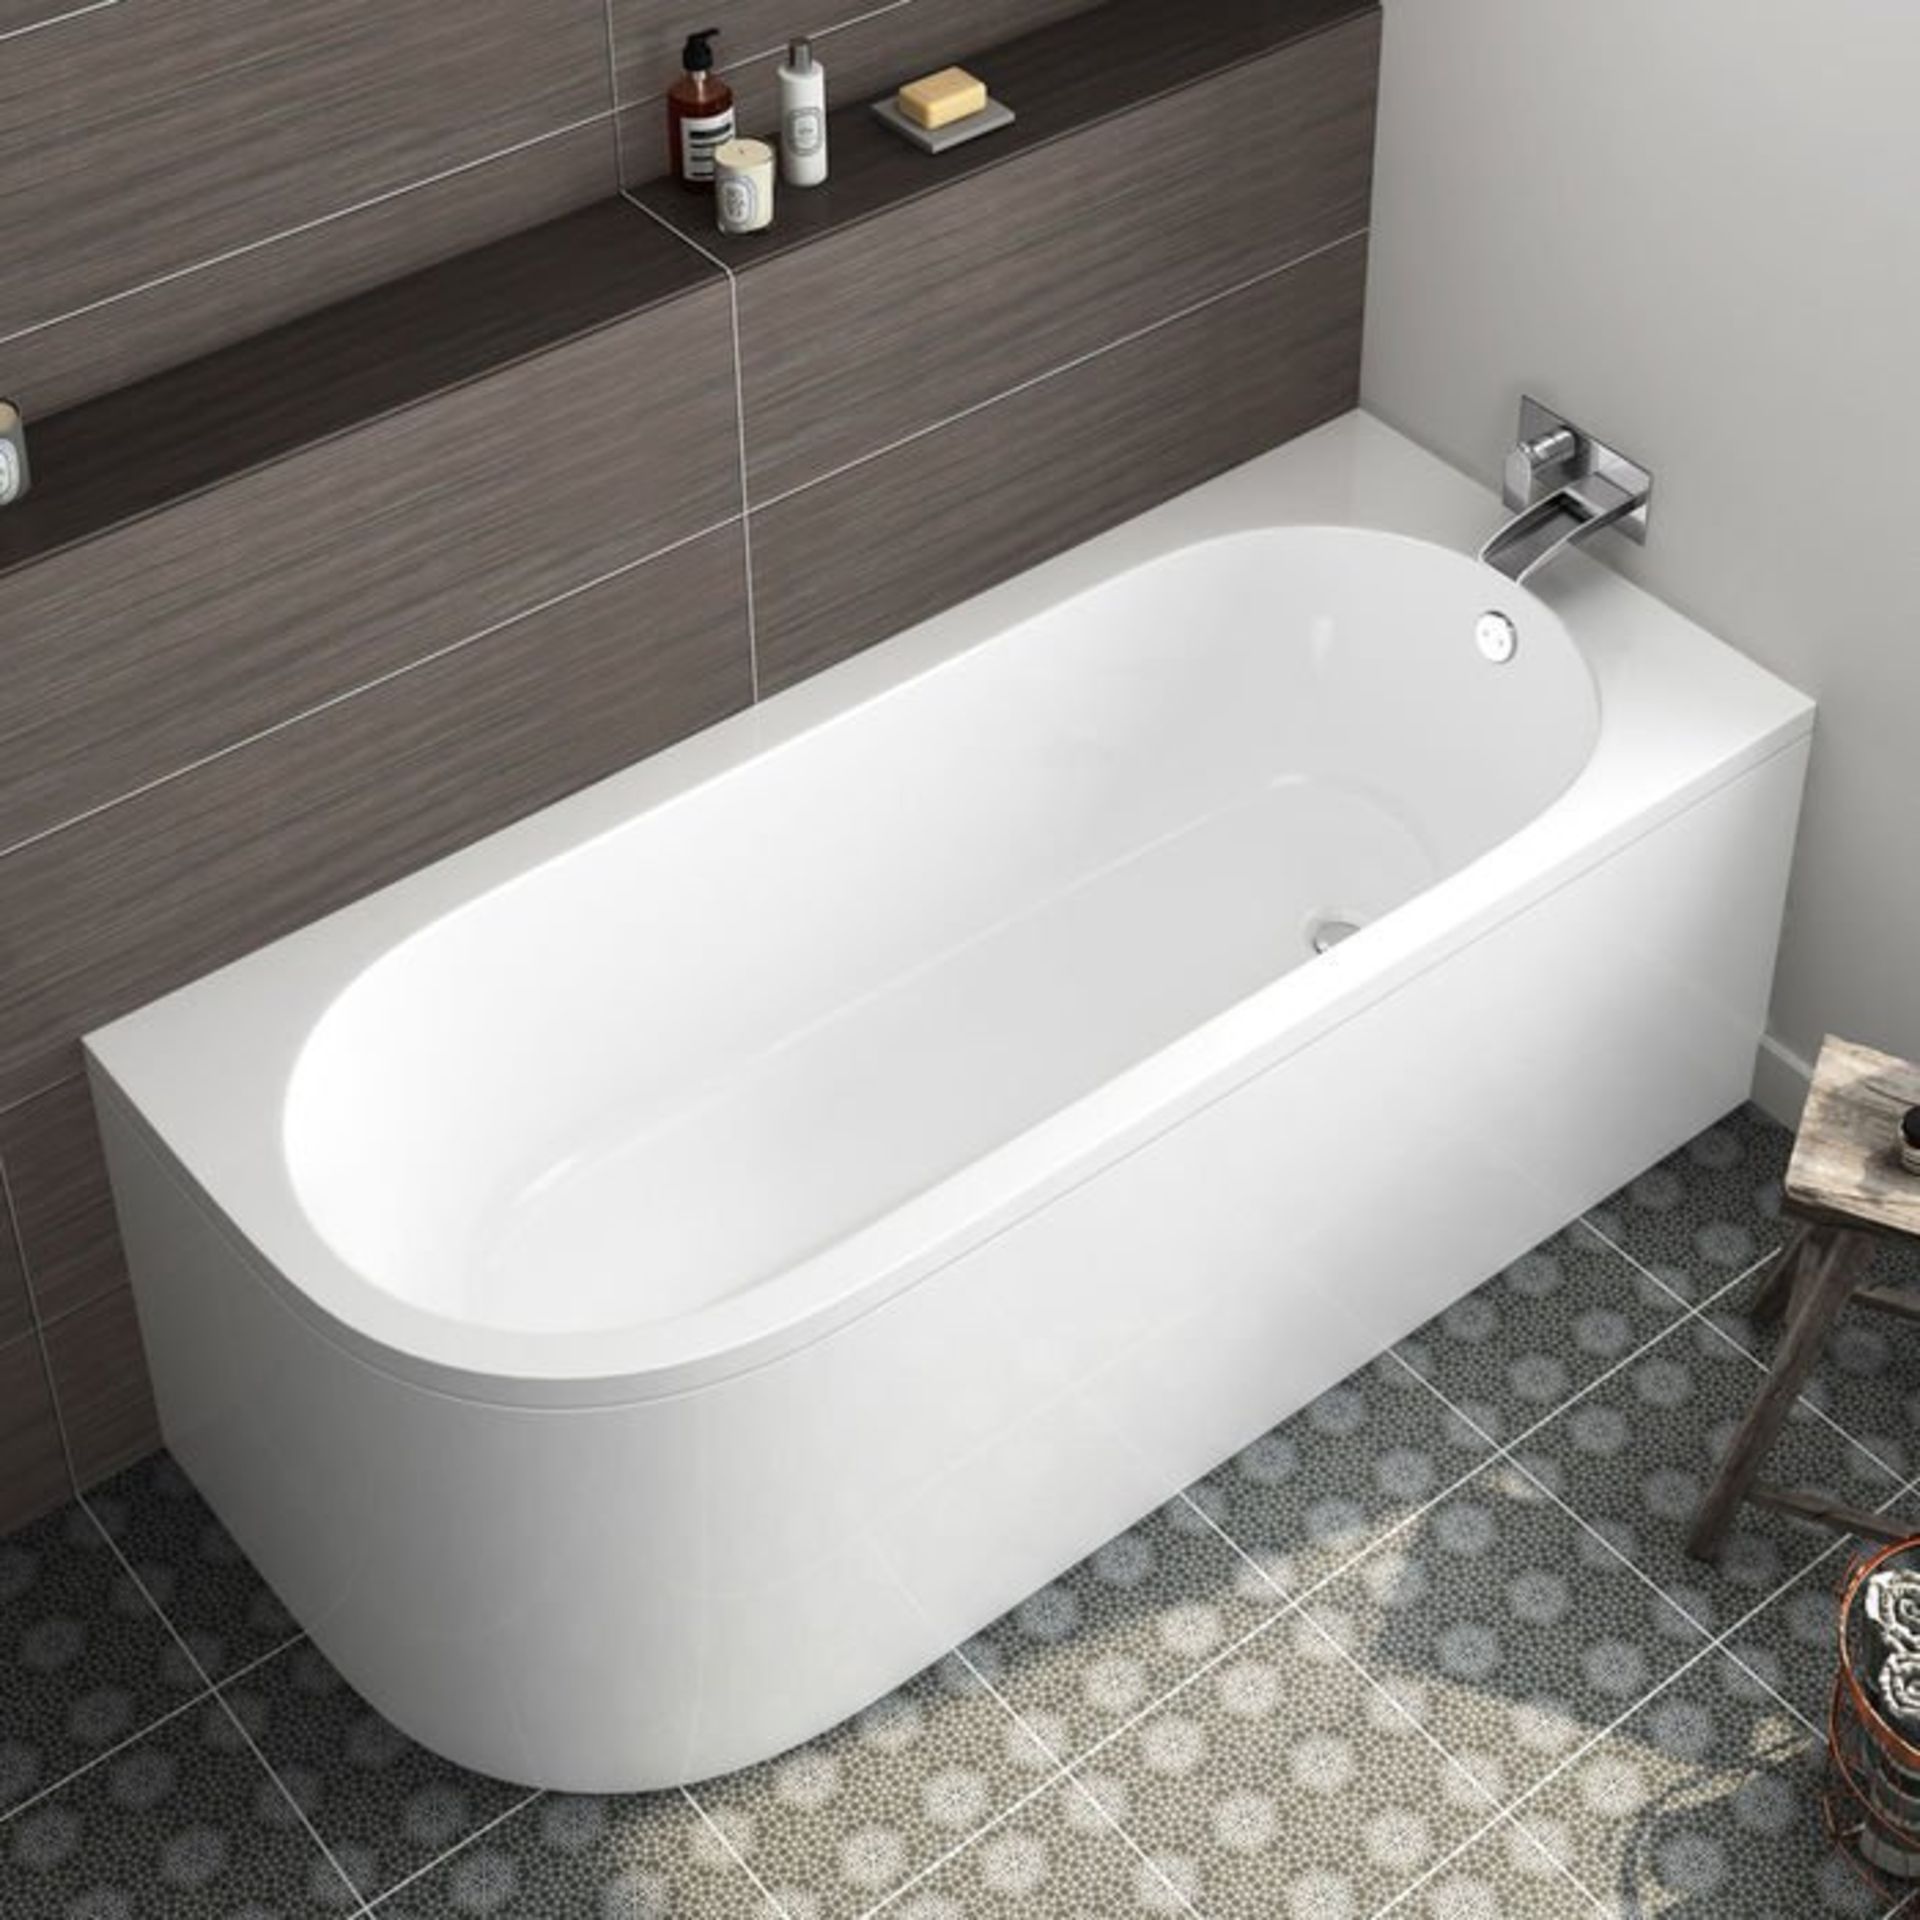 (S89) 1700x725mm Corner Back to Wall Bath (Includes Panels) - Right Hand RRP £599.99. The double